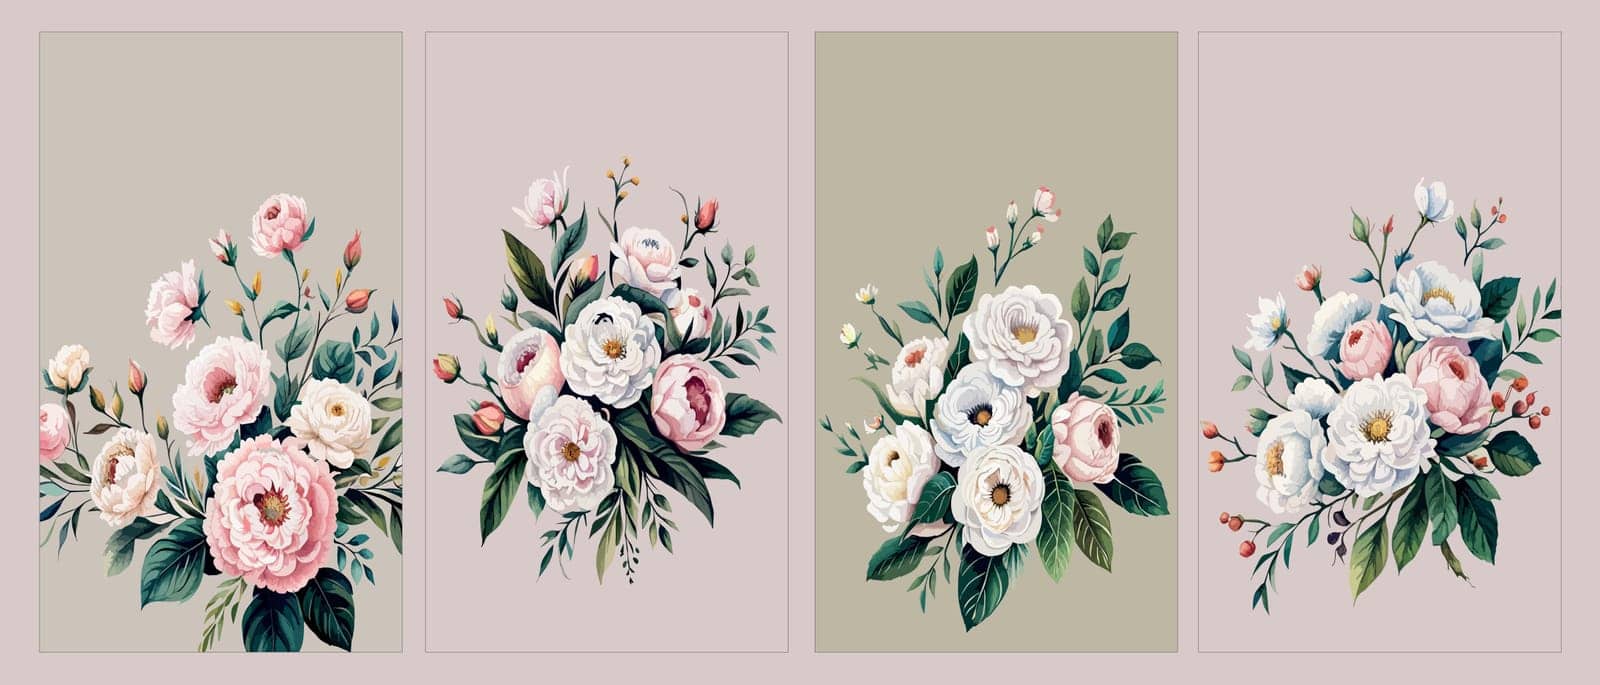 Banner set floral pattern with peonies on light background, watercolor. by EkaterinaPereslavtseva